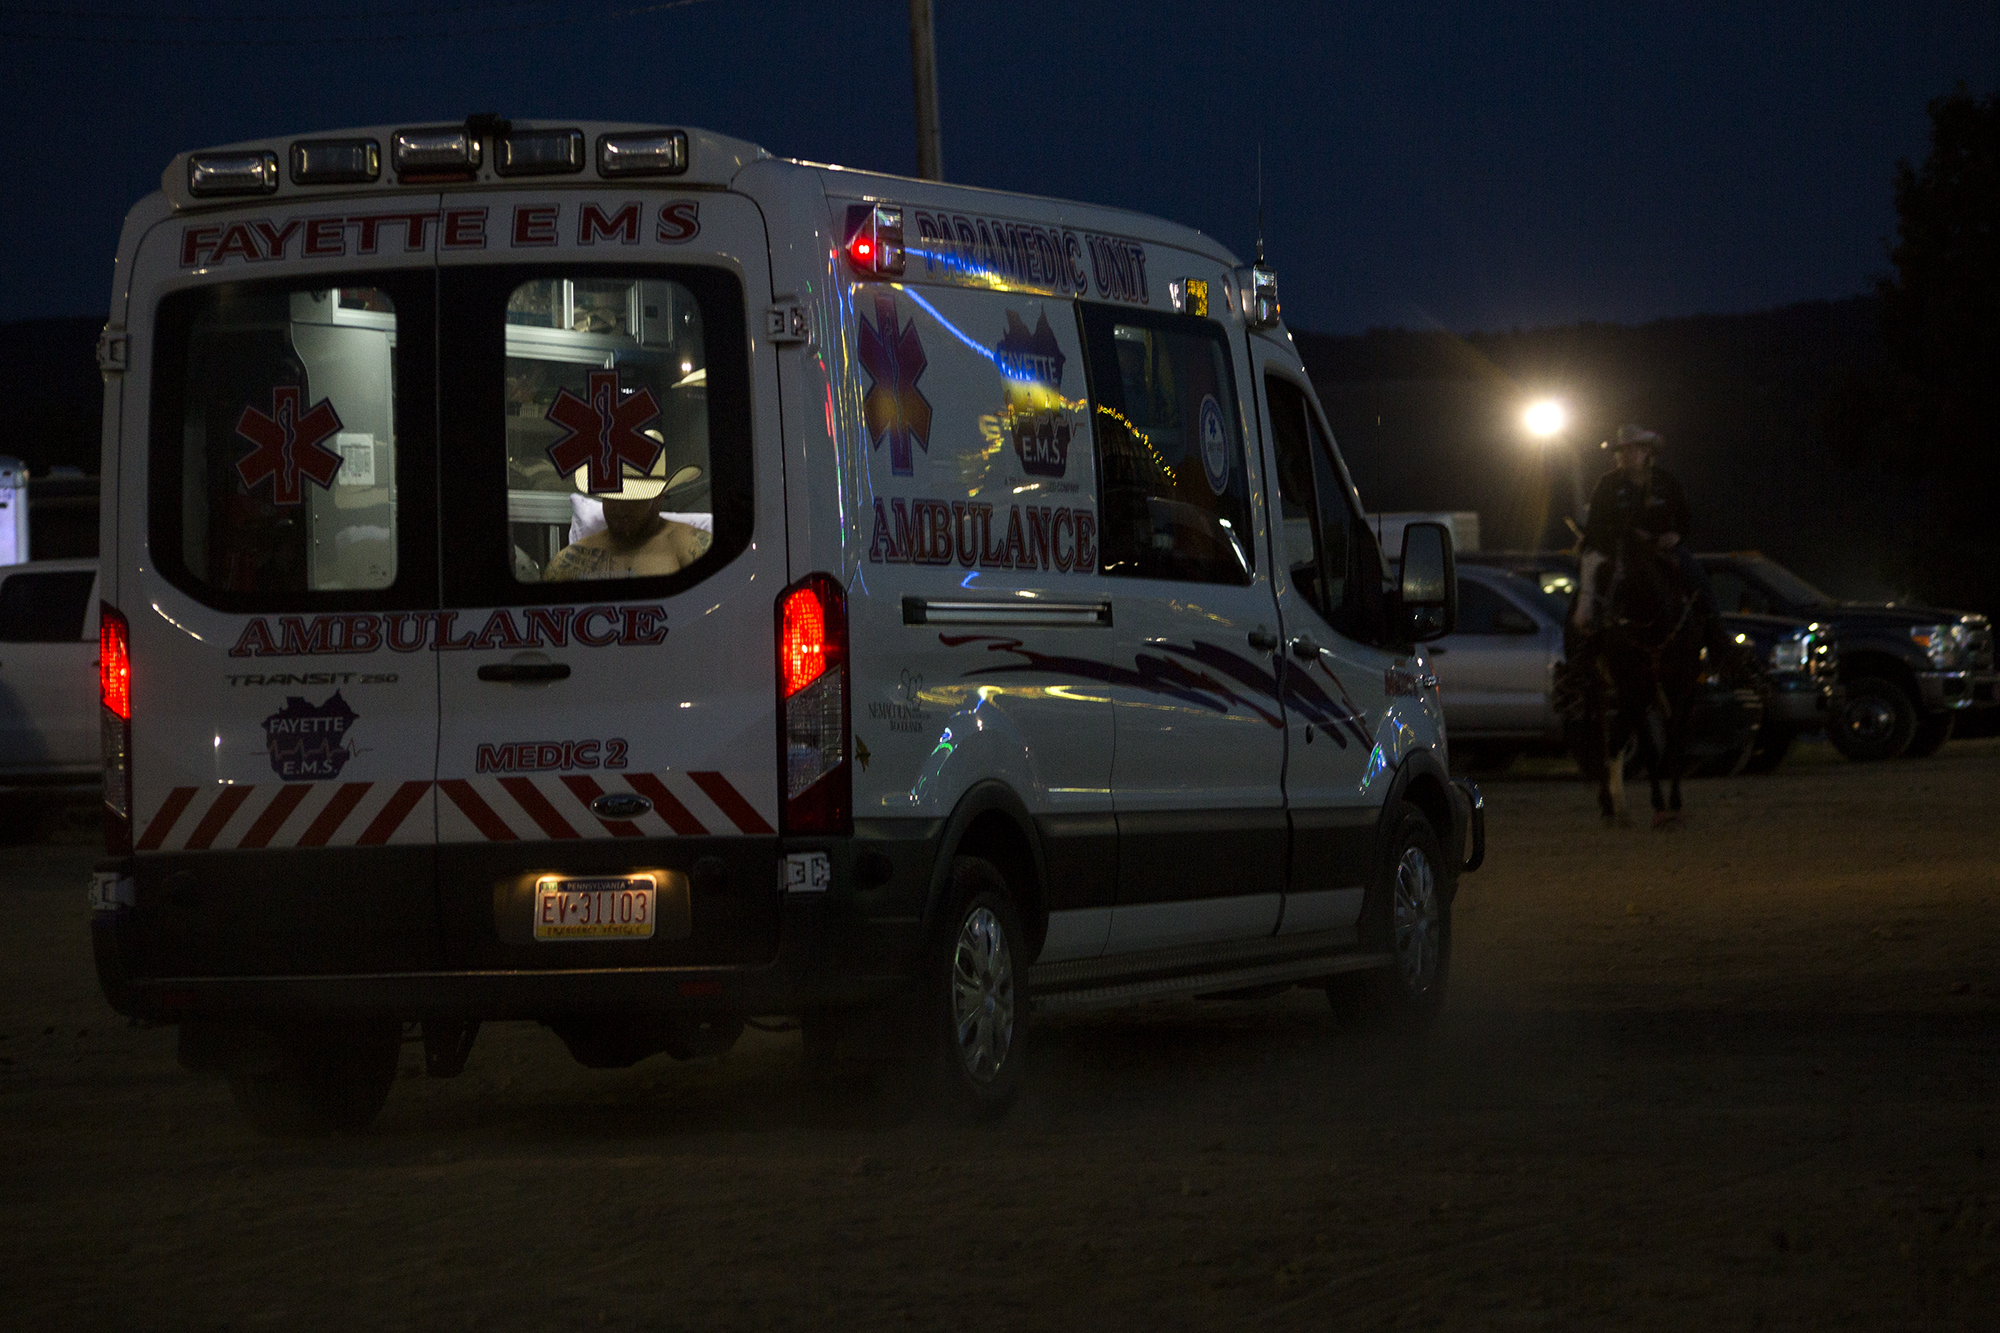  An injured participant in the Boys and Bulls Rodeo rides away in an ambulance at the Fayette County Fair on August 3, 2017. 